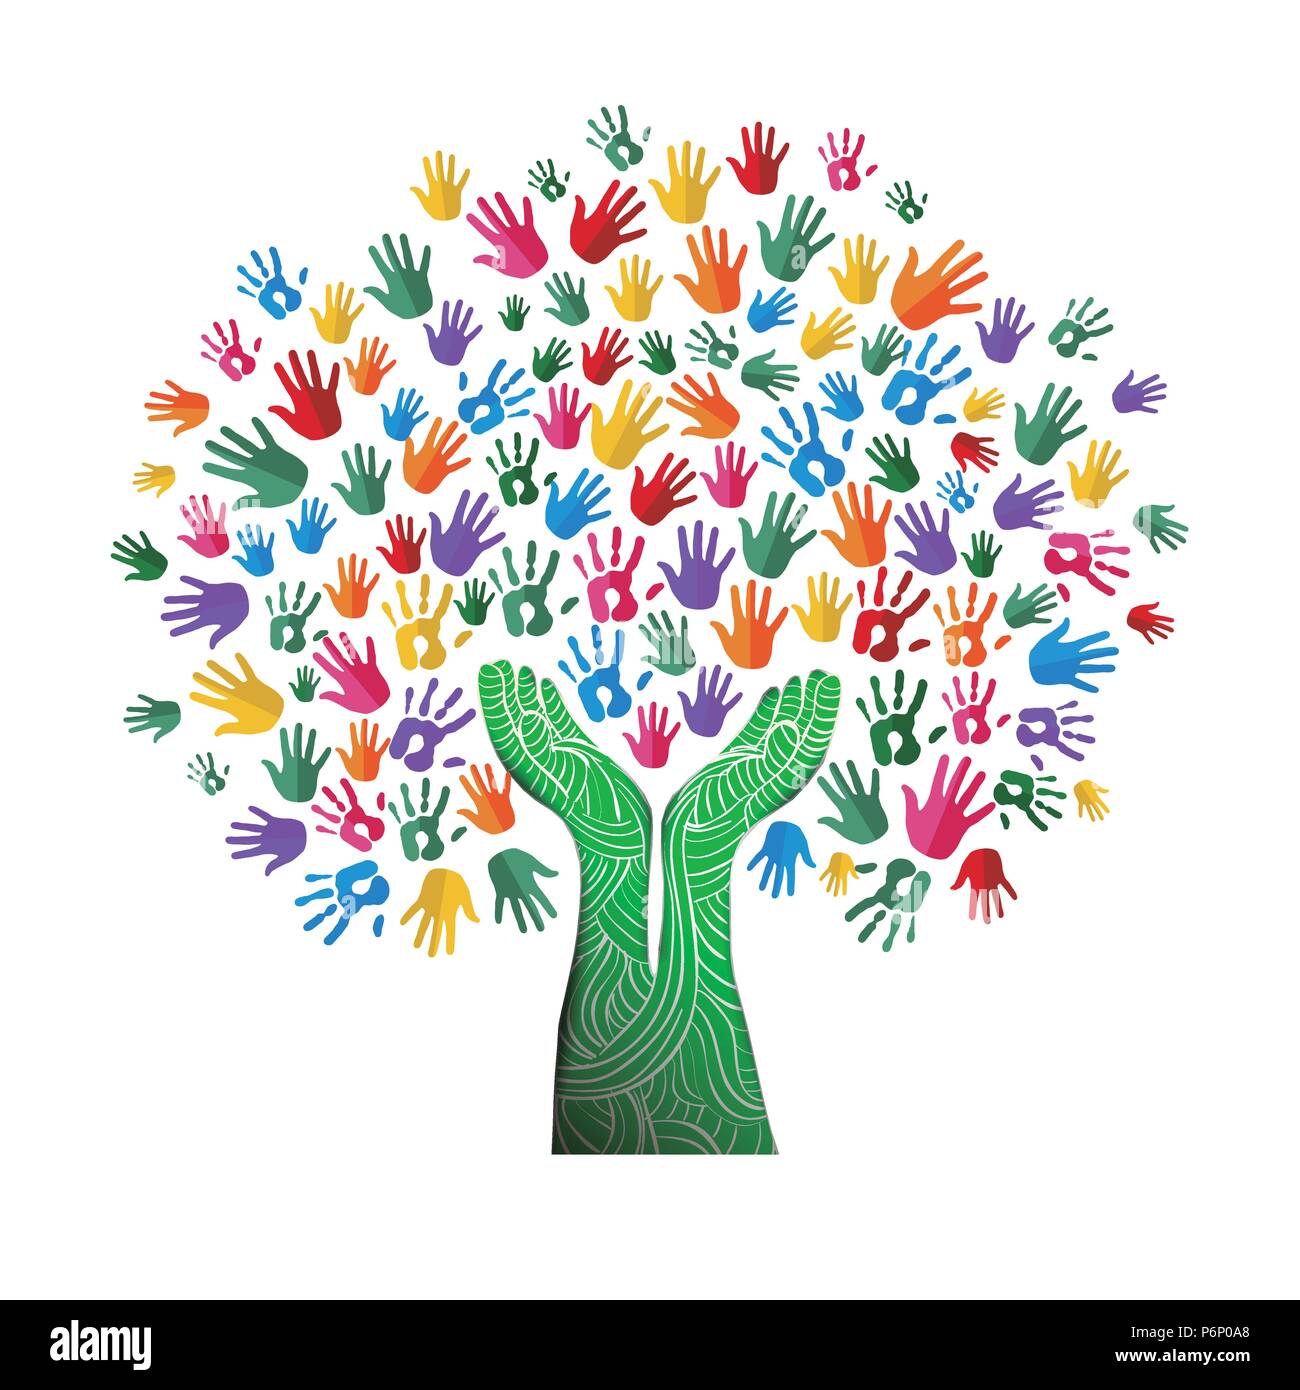 Tree with colorful human hands together in paper cut out style. Community team concept illustration for culture diversity, nature care or teamwork pro Stock Vector